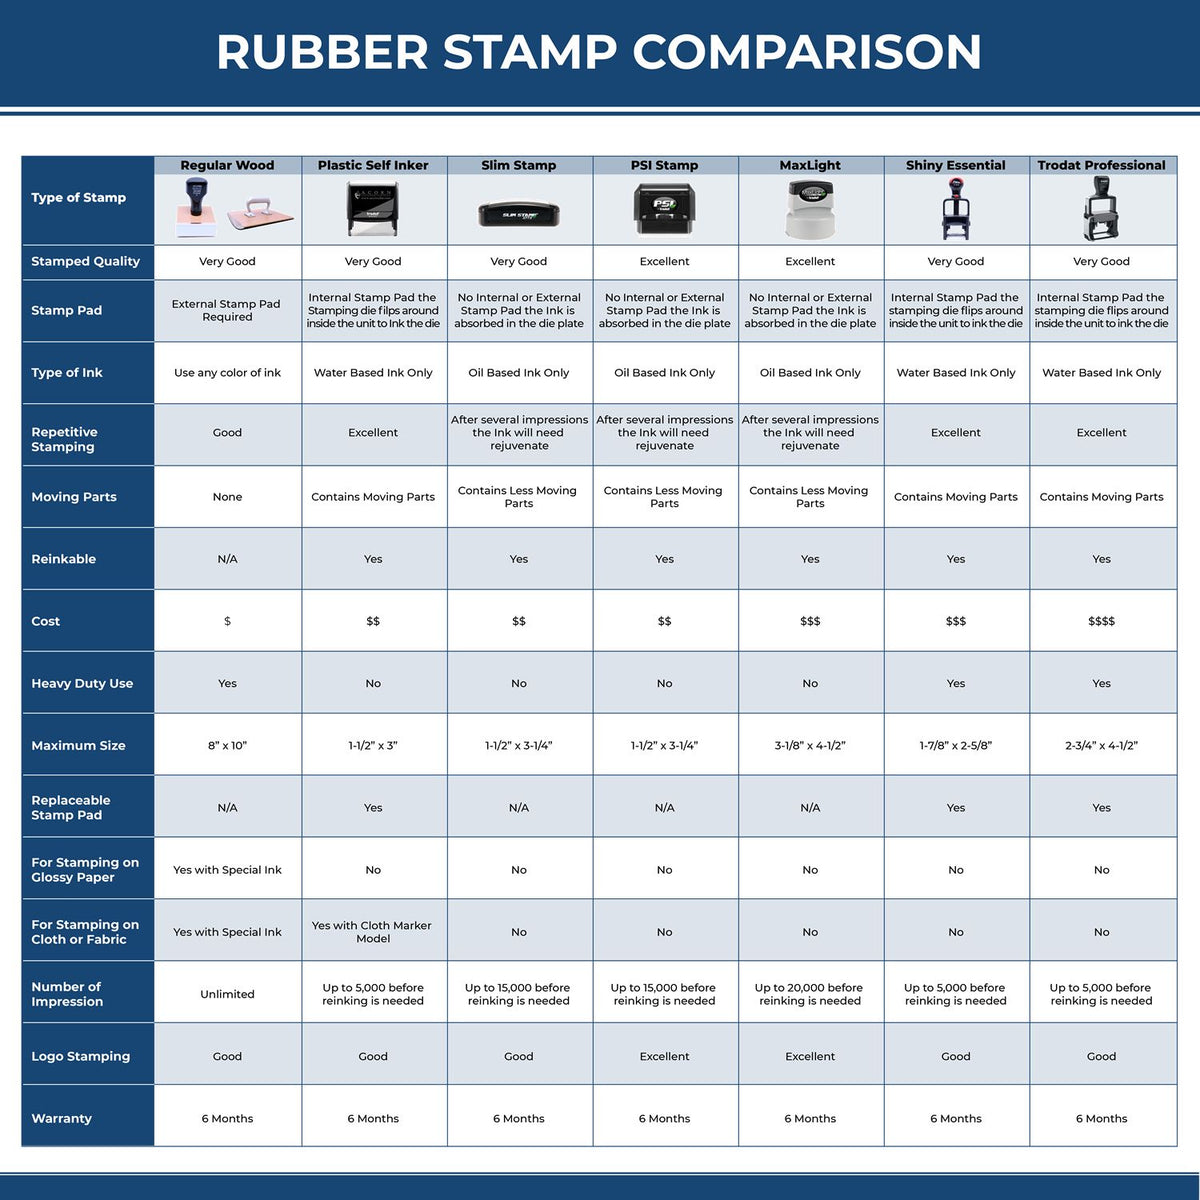 A comparison chart for the different types of mount models available for the Premium MaxLight Pre-Inked North Dakota Engineering Stamp.